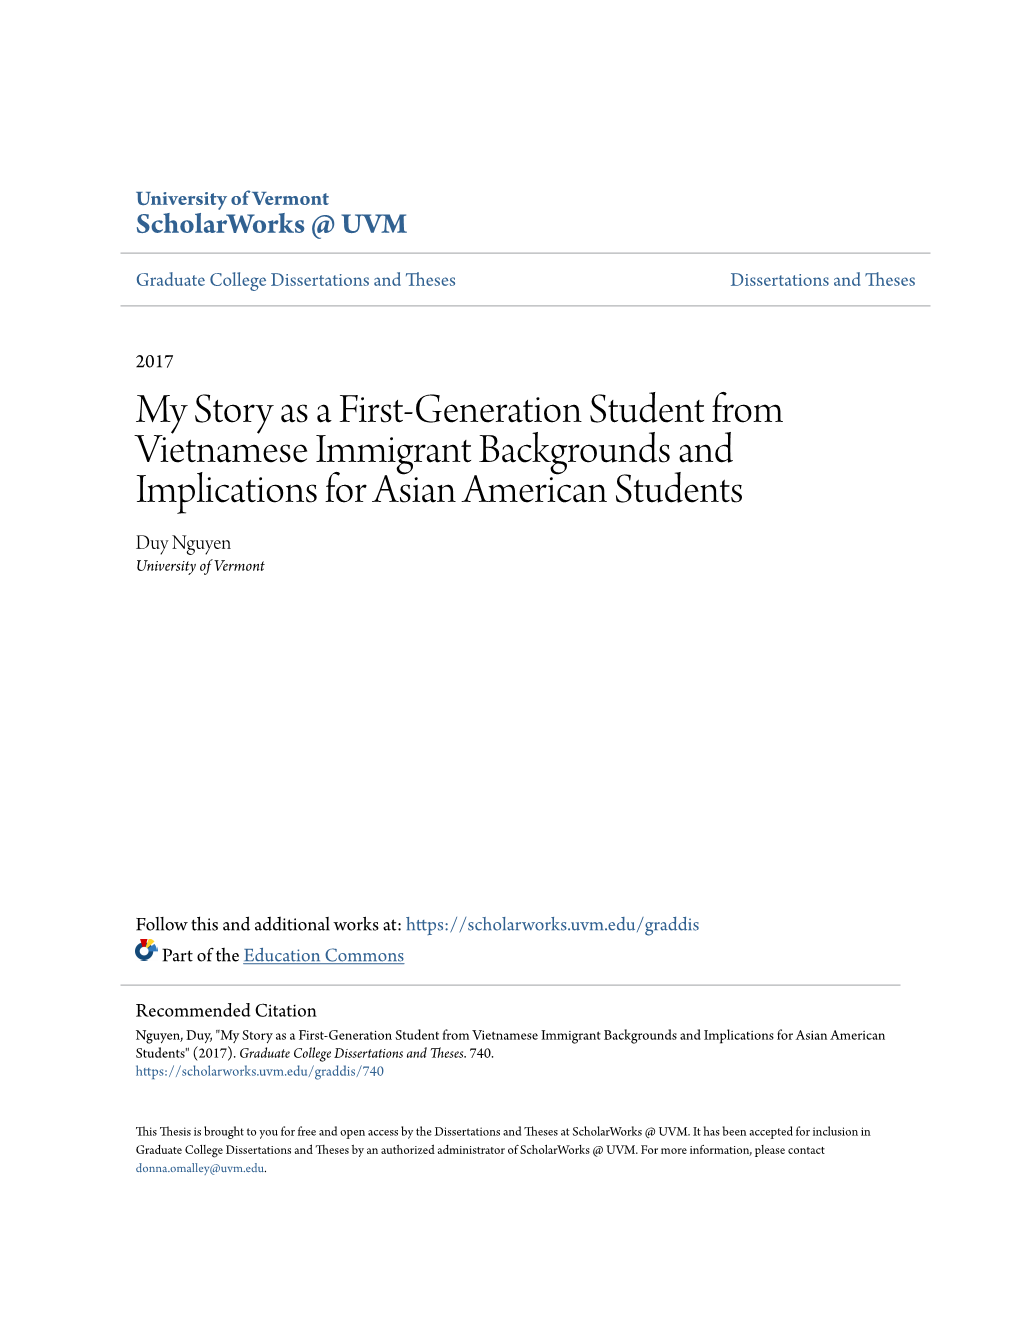 My Story As a First-Generation Student from Vietnamese Immigrant Backgrounds and Implications for Asian American Students Duy Nguyen University of Vermont